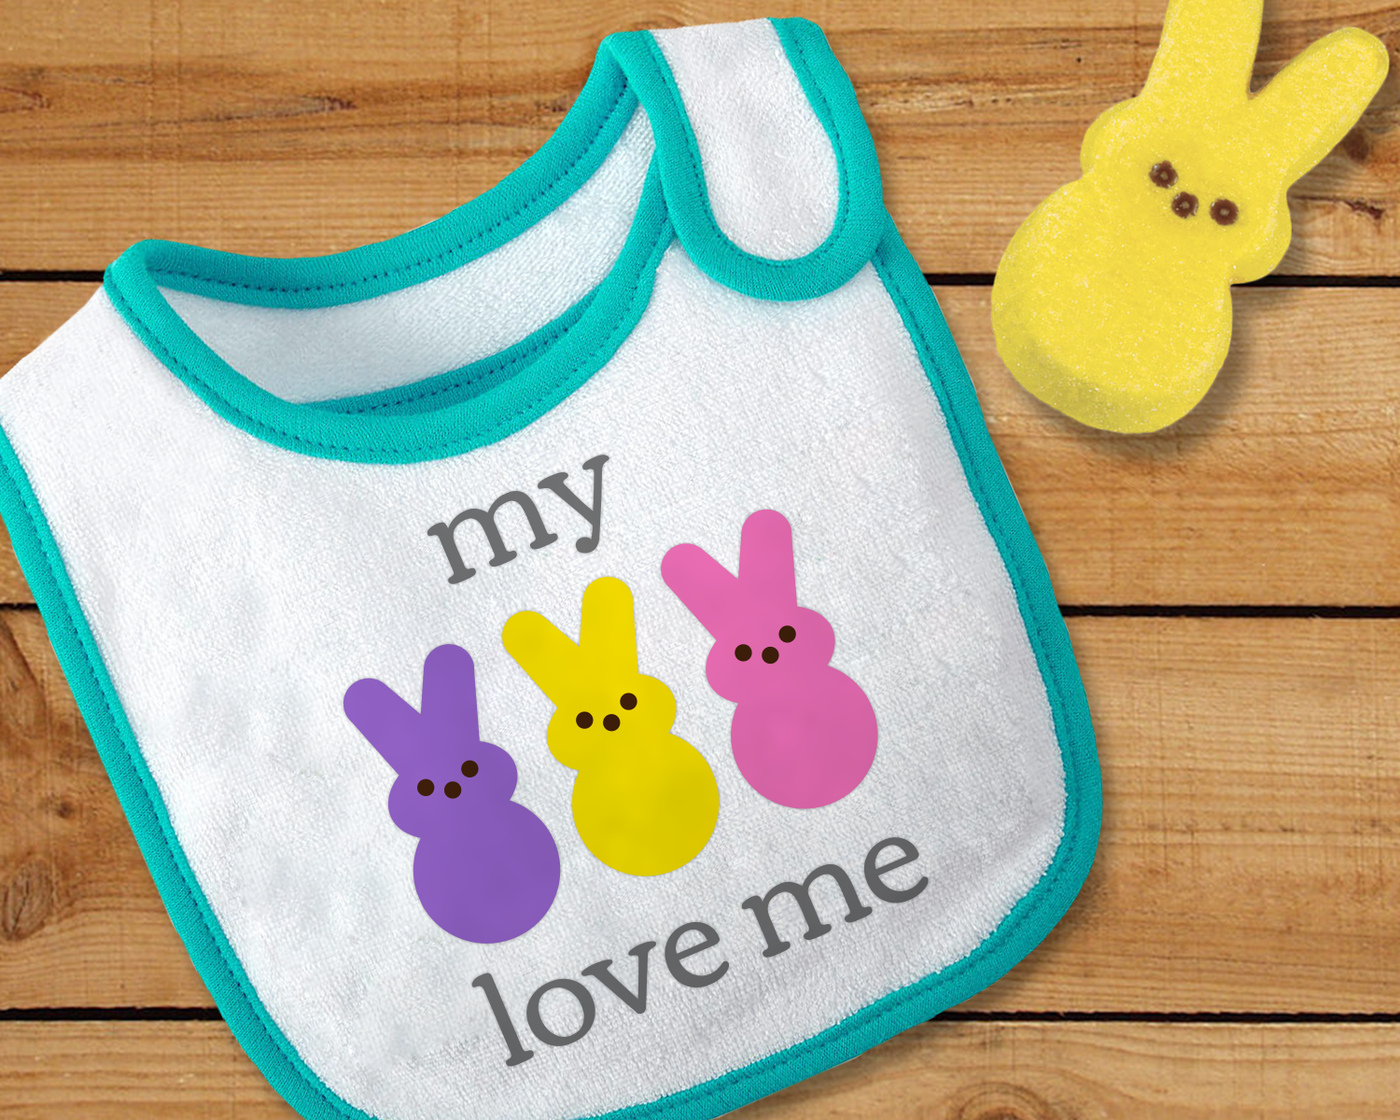 Bib with a design of 3 bunnies to complete the phrase "my [peeps] love me."